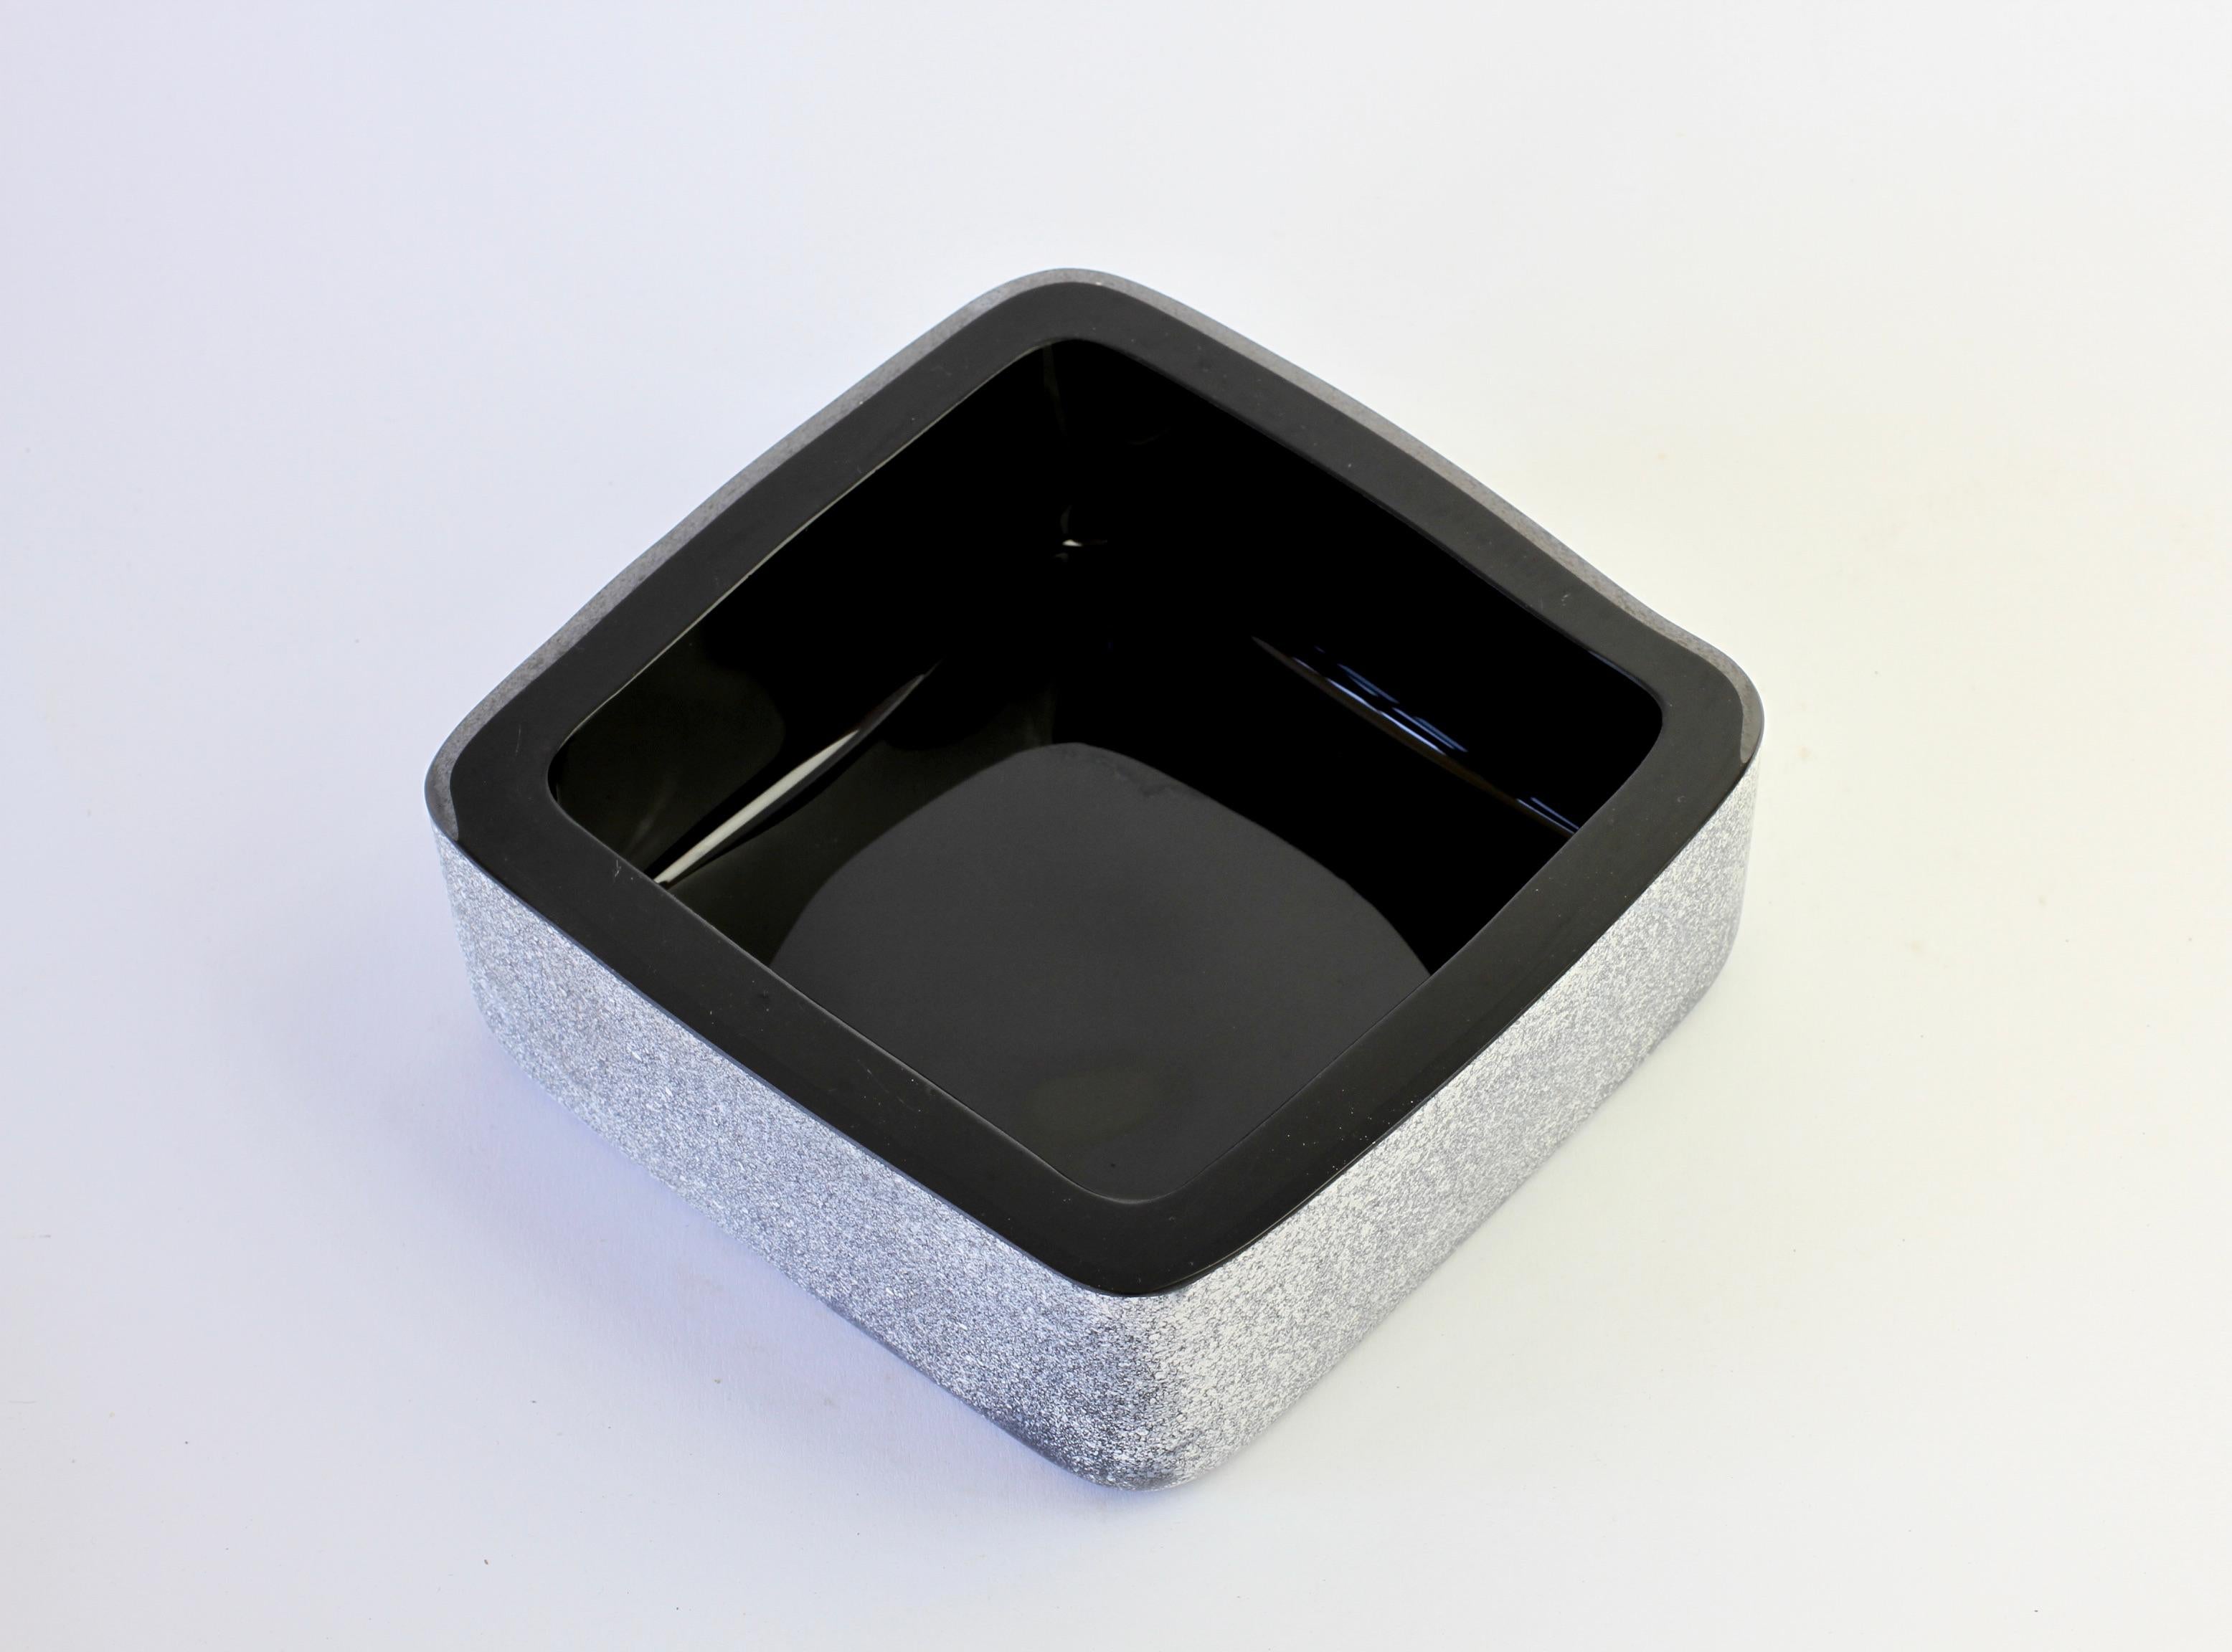 Huge and rare Karl Springer style black colored / coloured square Murano glass bowl, dish or ashtray with white 'a Scavo' finish by Seguso Vetri d'Arte Murano, Italy, circa 1980s. Elegant and simplistic in form and showing extraordinary workmanship